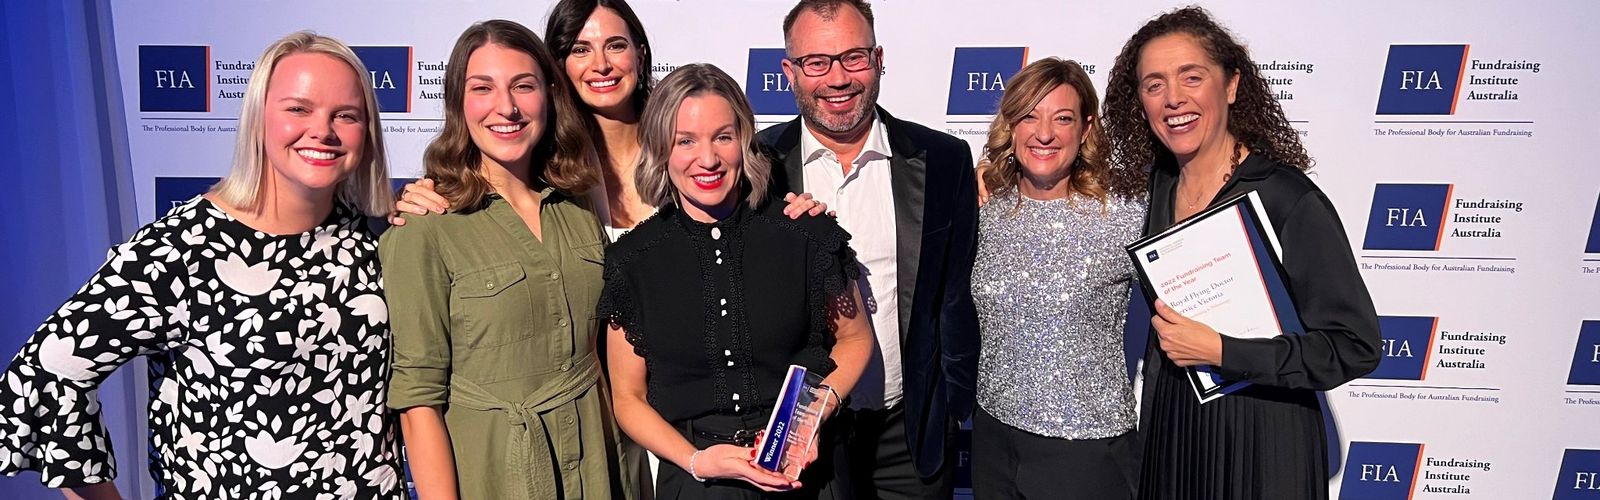 RFDS Victoria wins Fundraising Team of the Year at FIA Awards